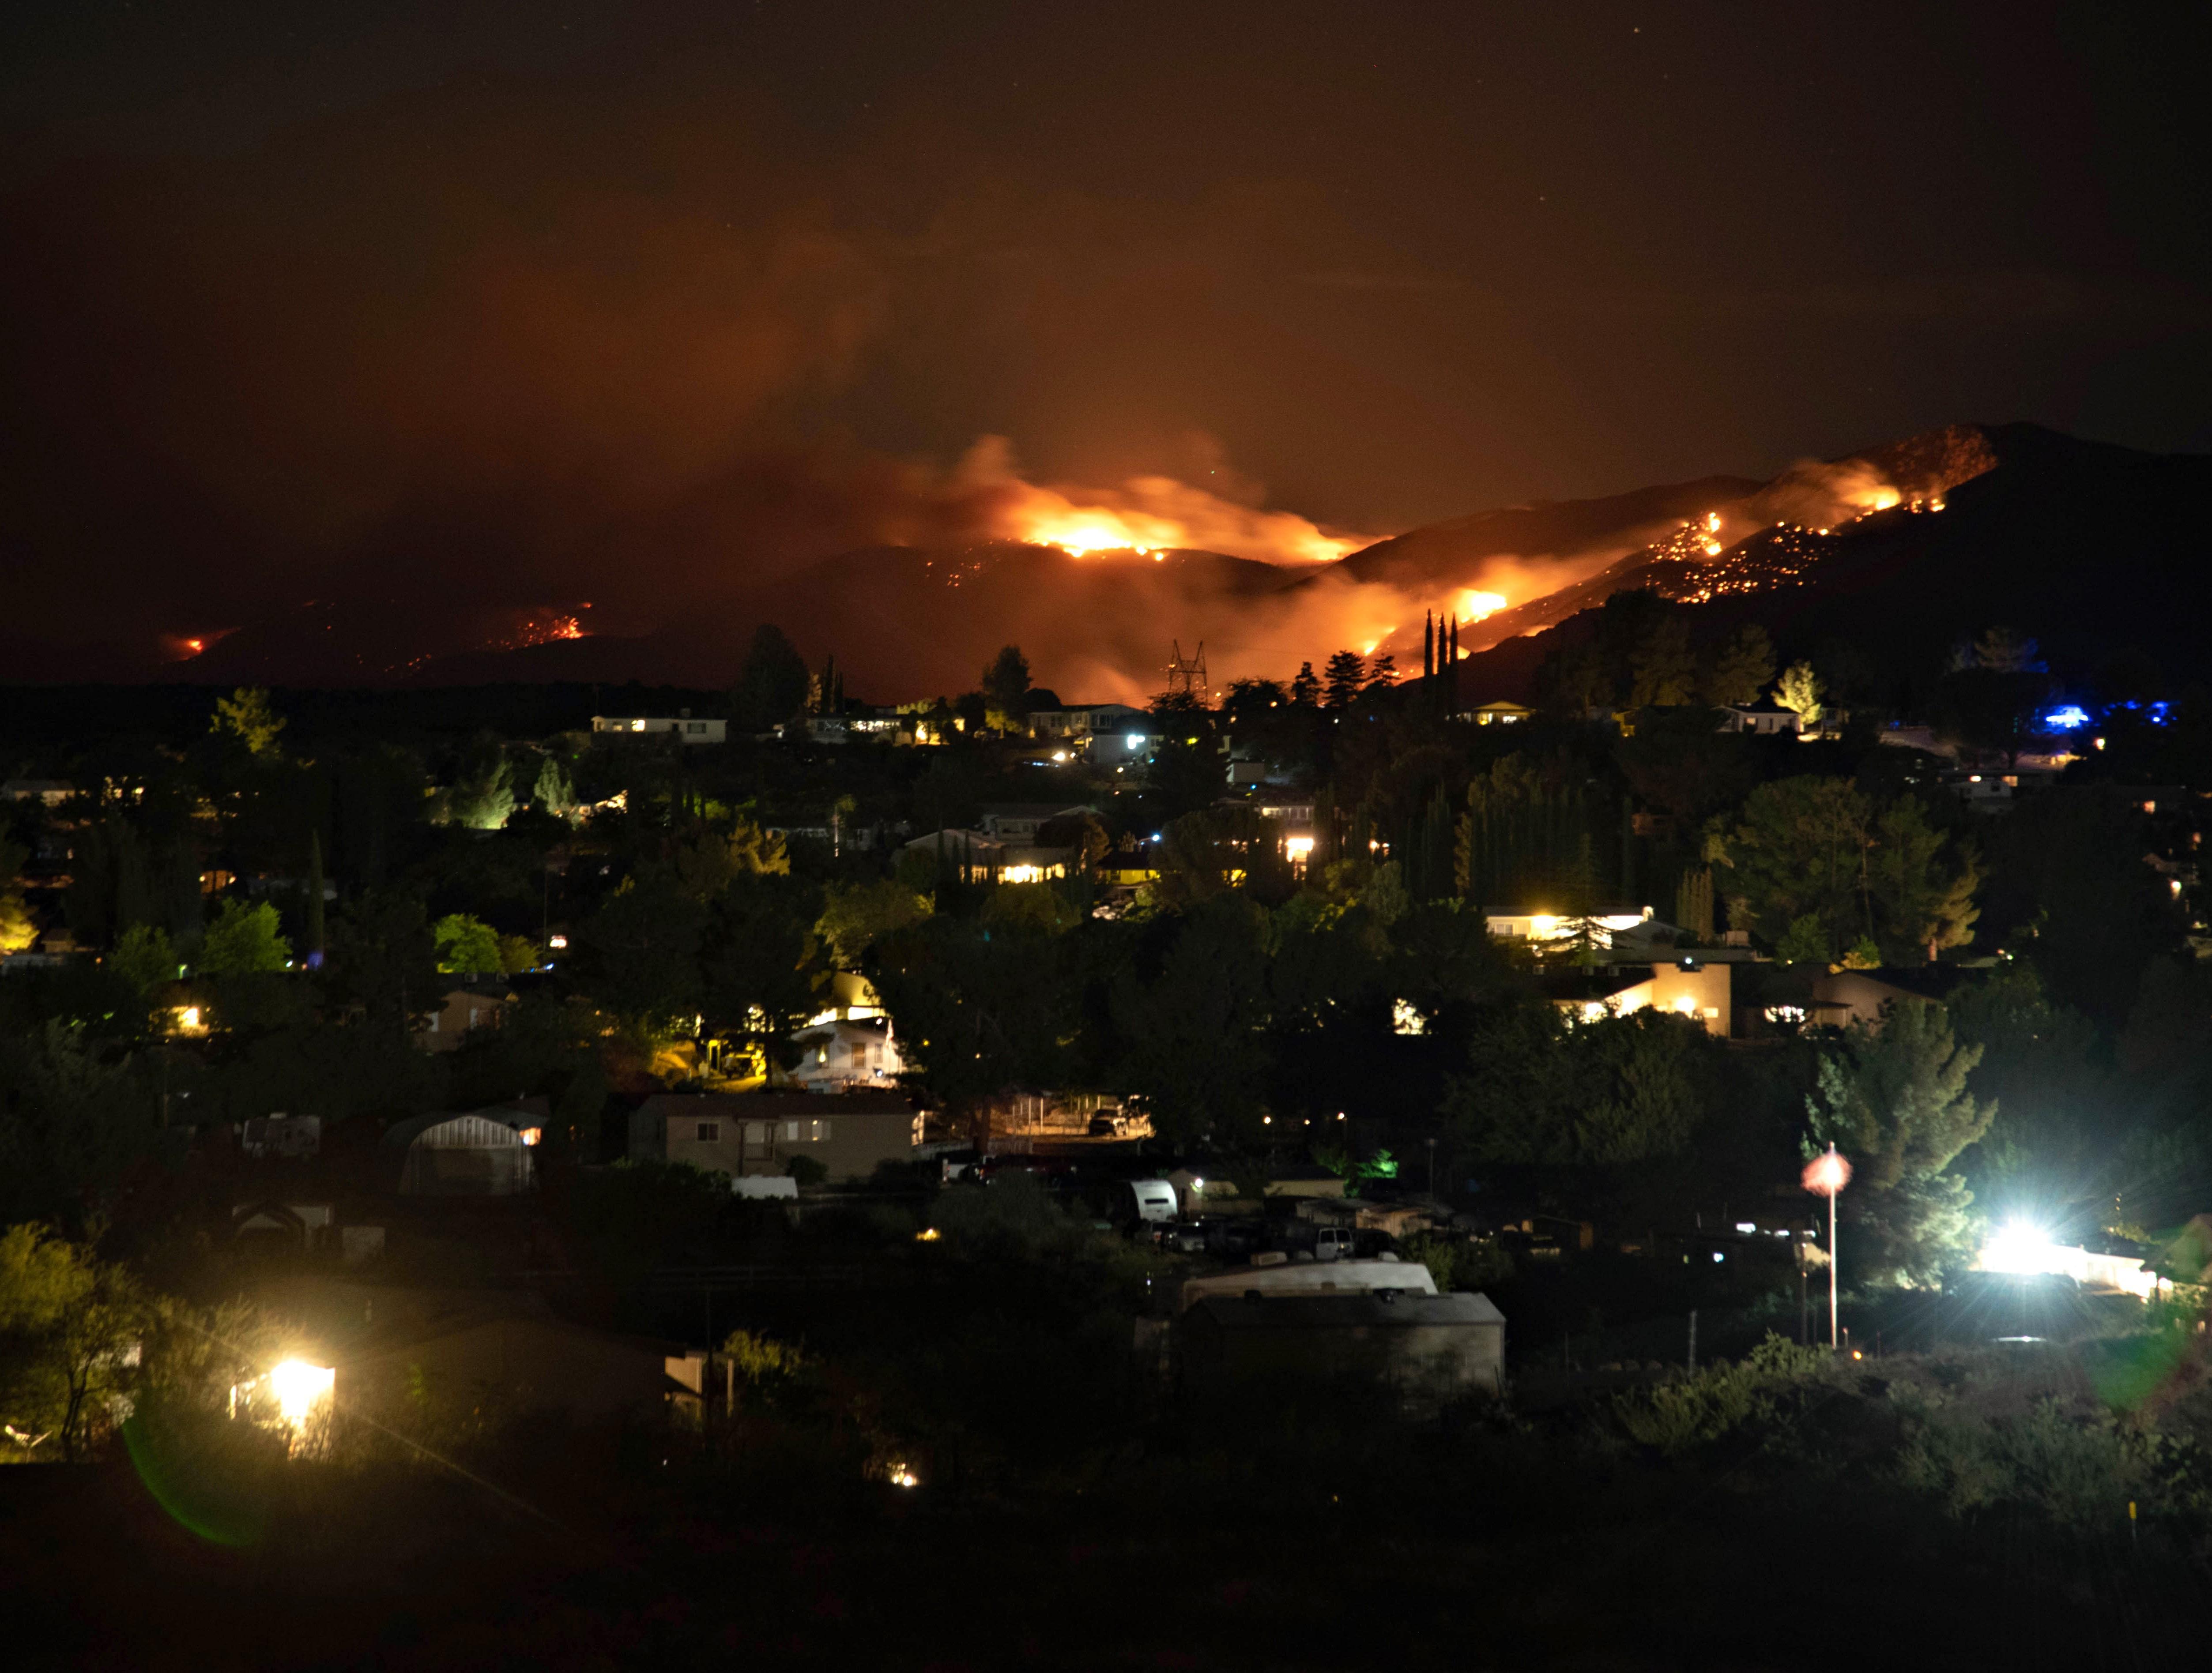 Nightime photo taken July 6 of Tiger fire from ICP bright flames in night